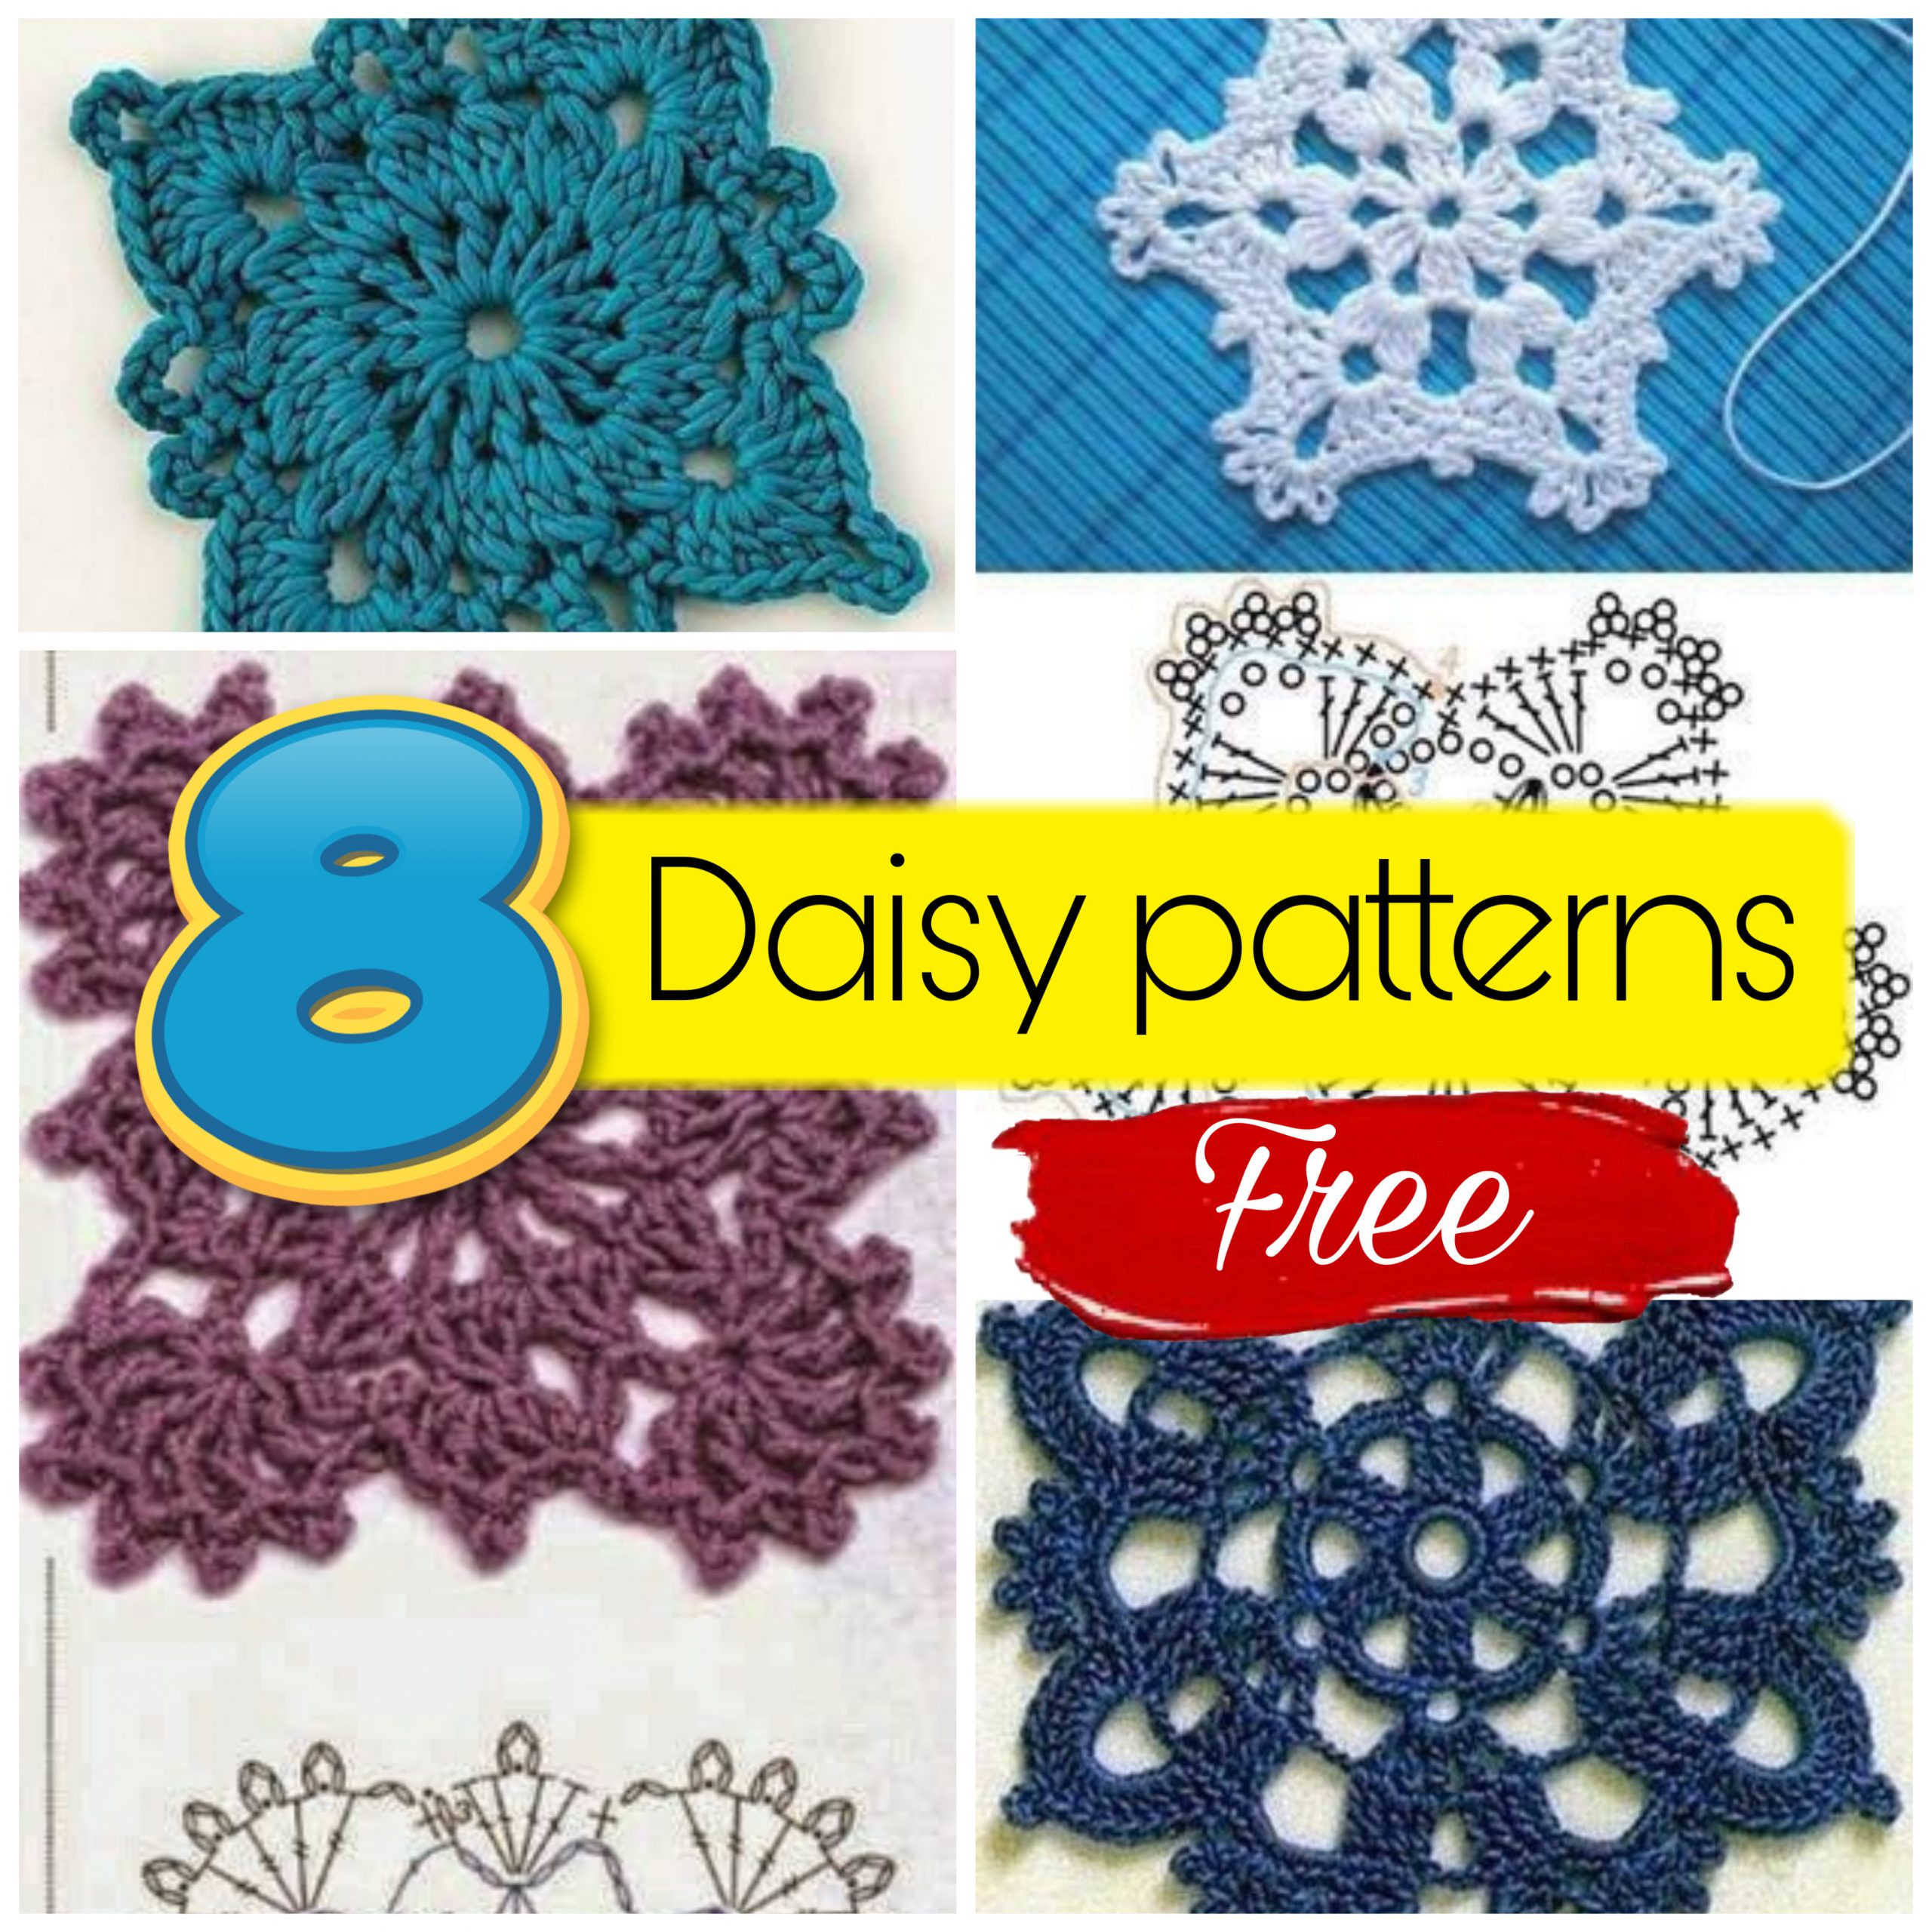 8 free crochet daisy patterns with samples